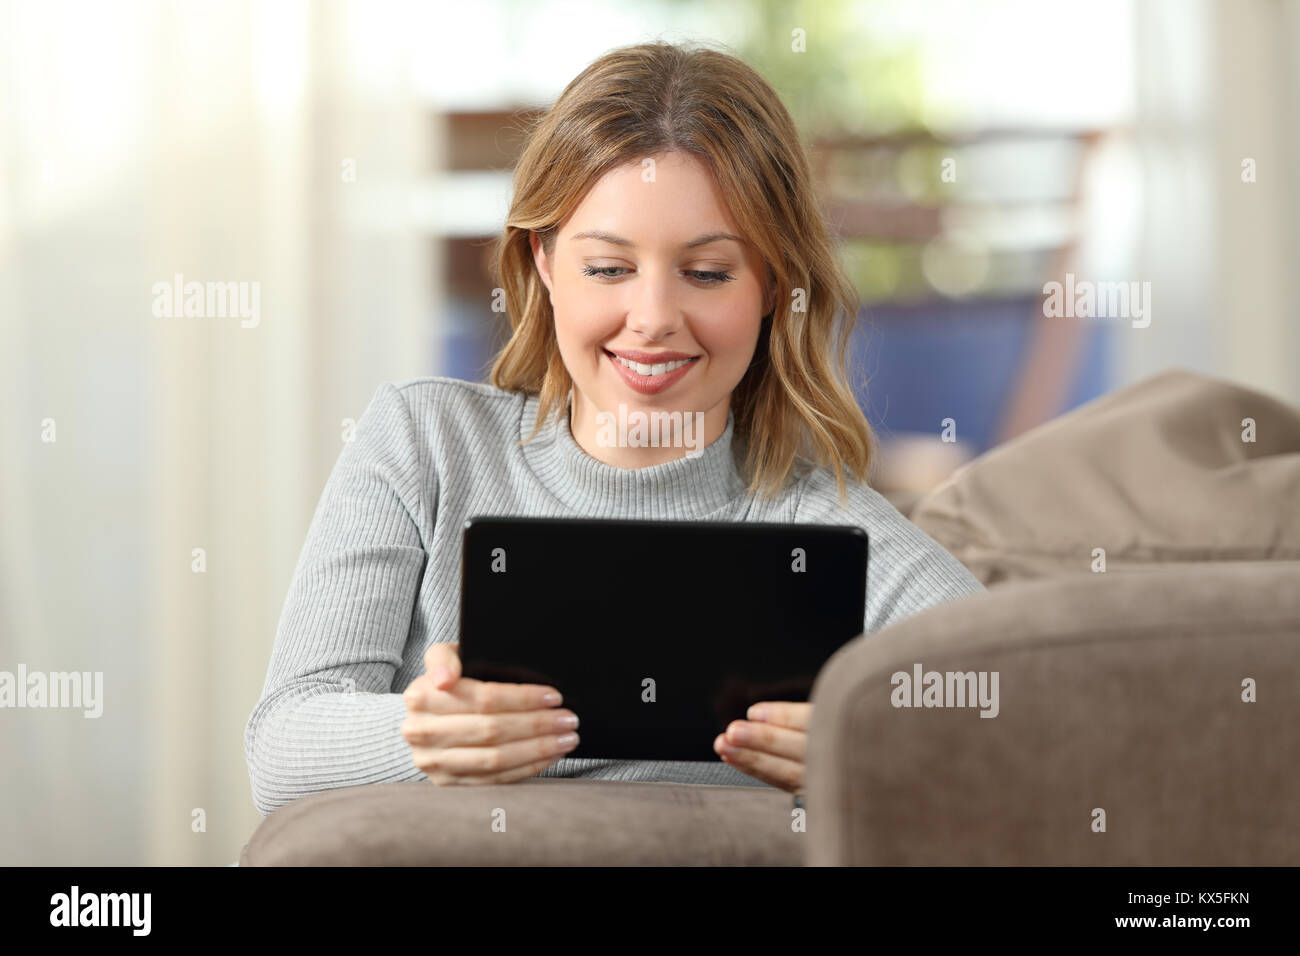 Front view of a woman watching video in a tablet sitting on a couch in the living room at home Stock Photo